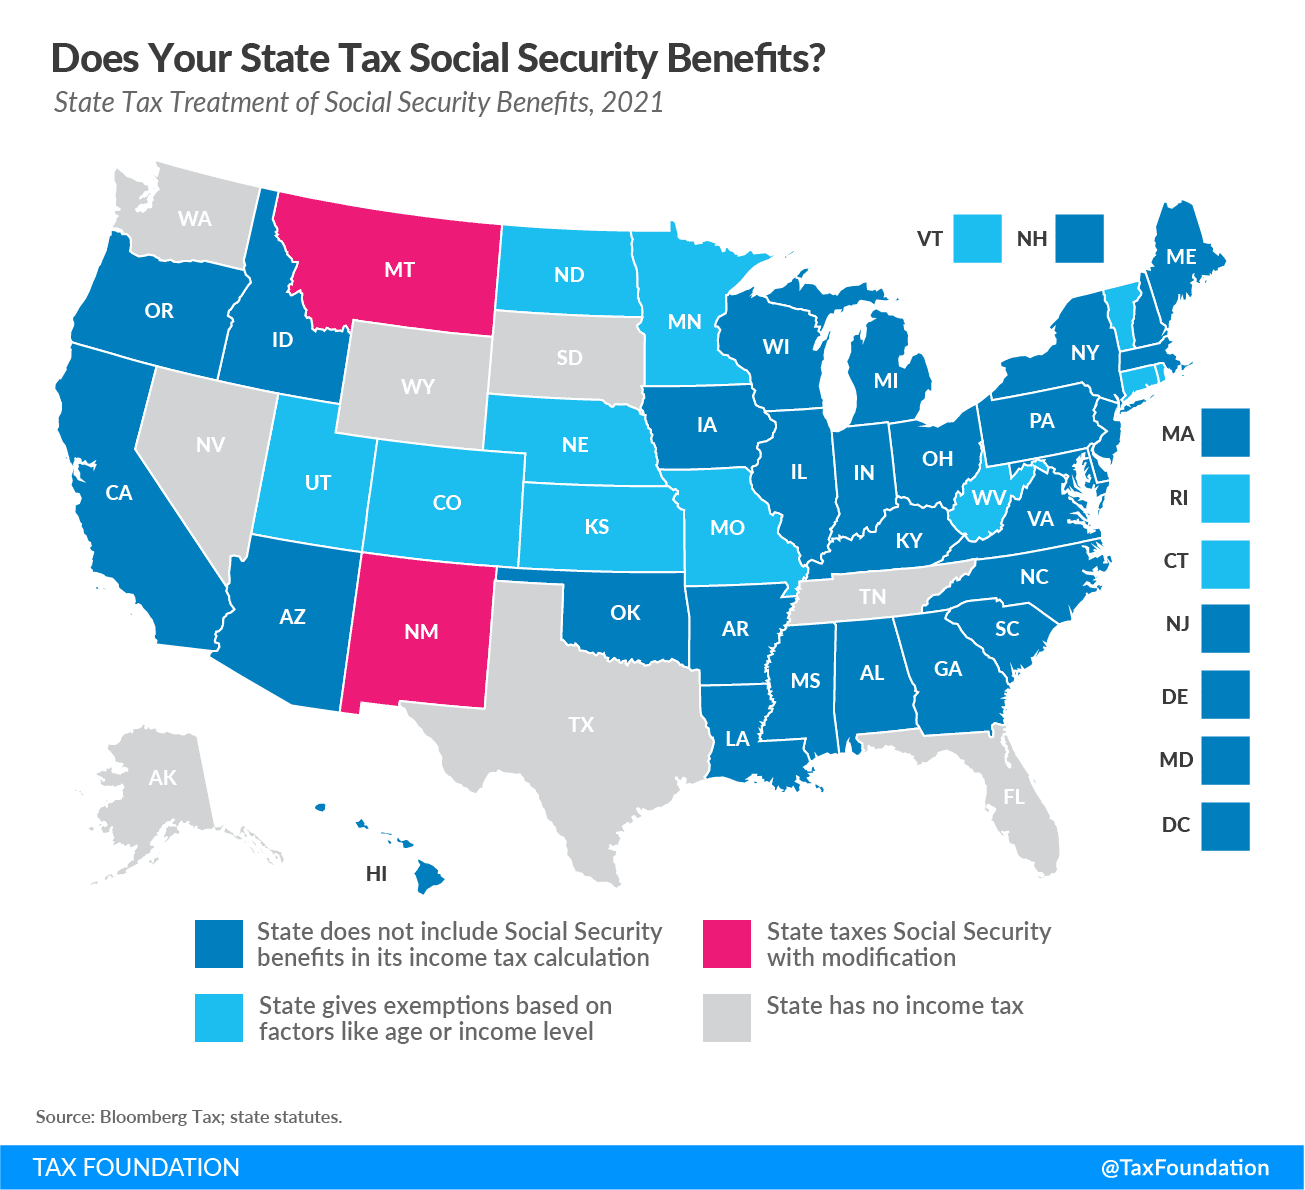 Does Your State Tax Social Security Benefits? 2021